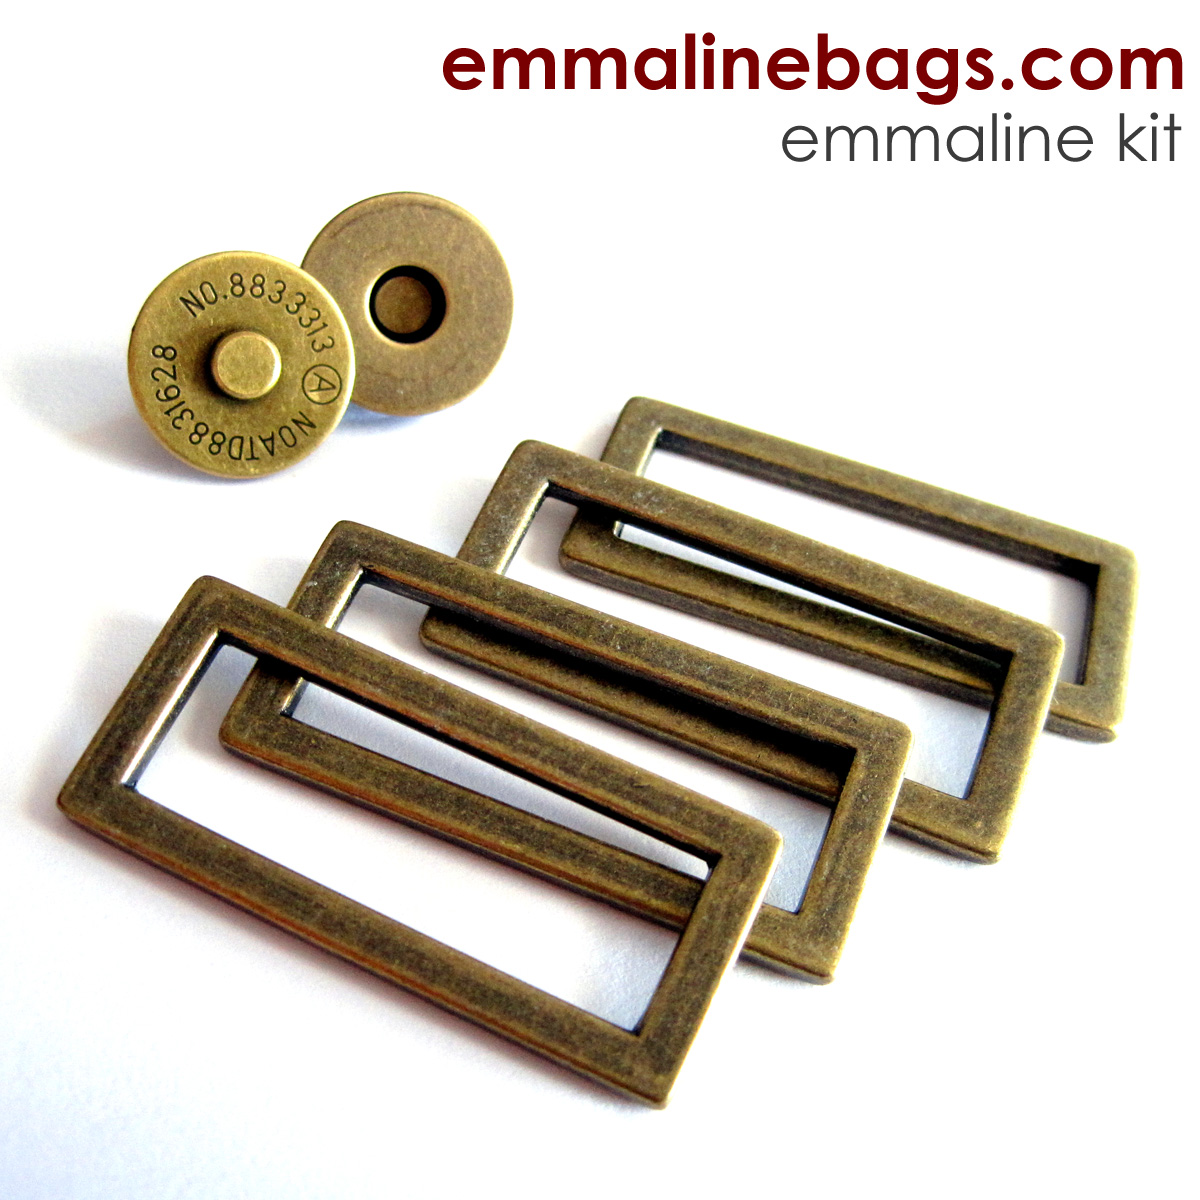 Emmaline Bags: Sewing Patterns and Purse Supplies: New Handbag Hardware on my Website!